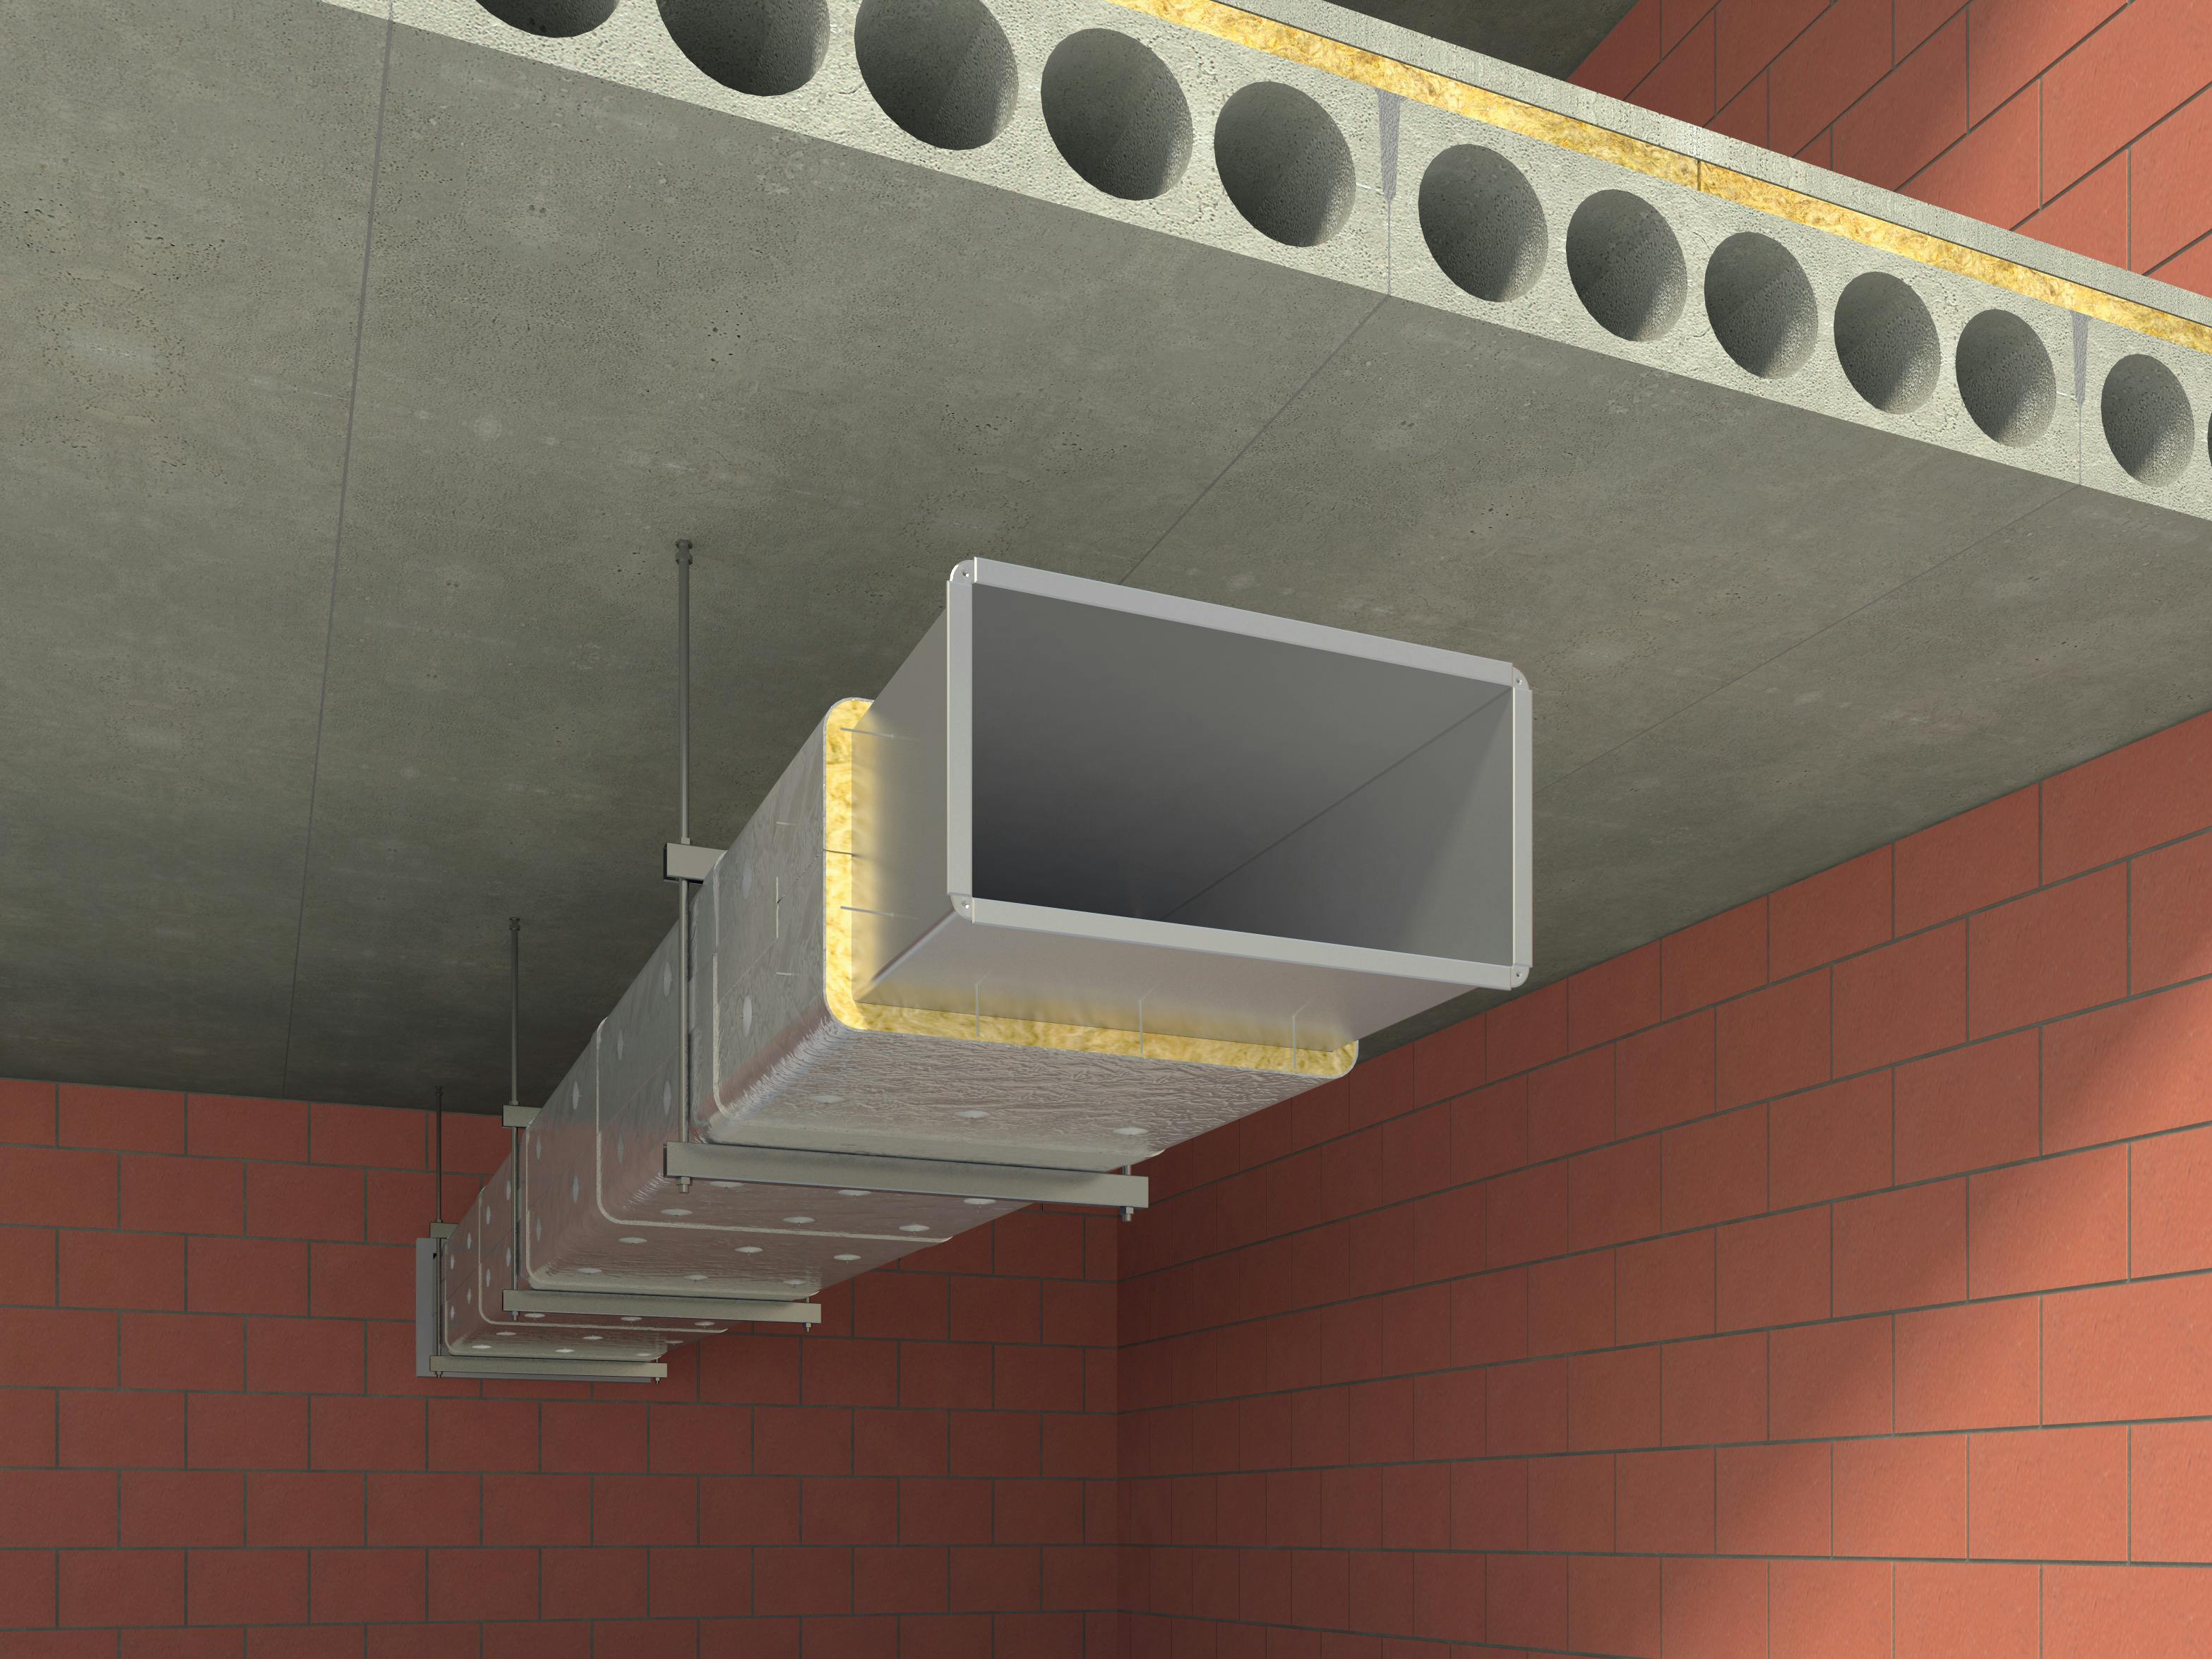 insulation of steel ventialion duct